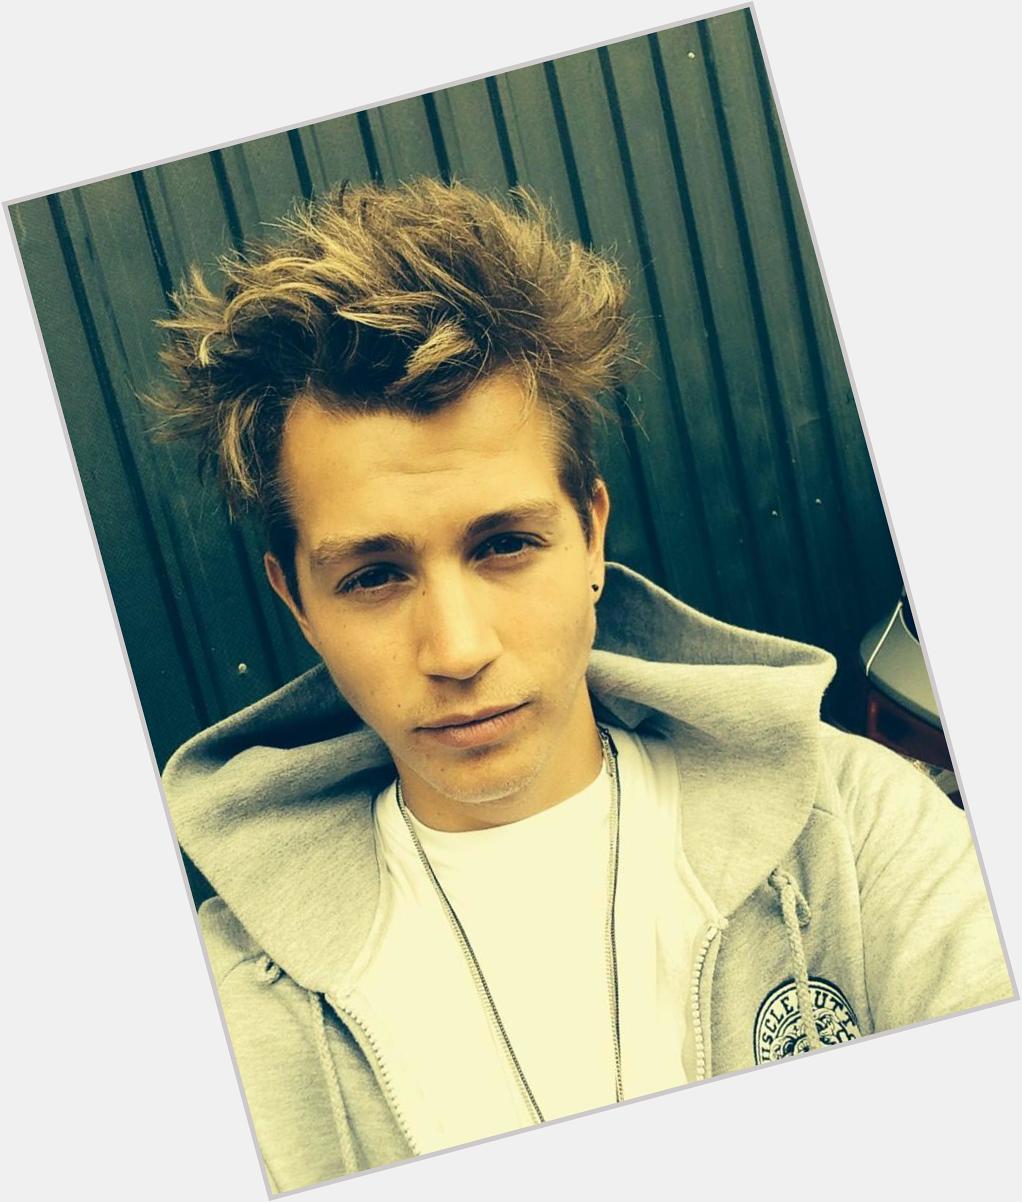 Happy birthday to the one and only James McVey! Have an amazing day ily     